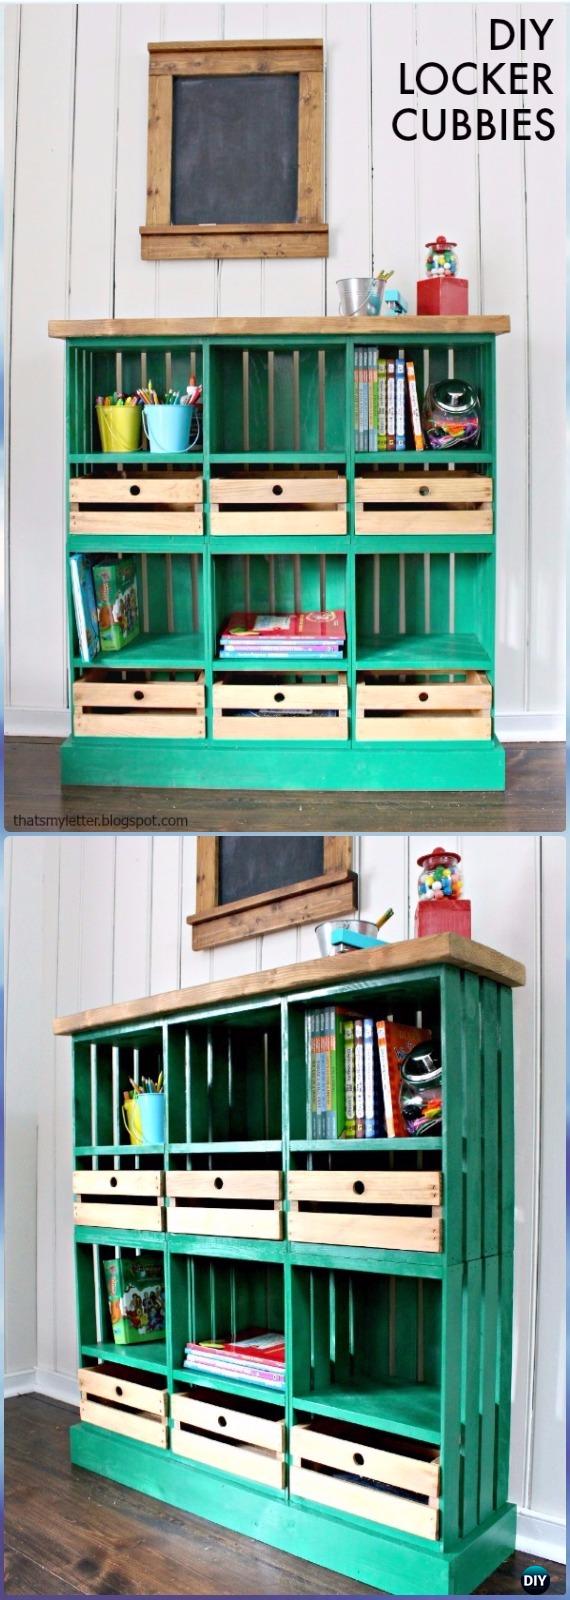 DIY Wood Crate Locker Cubbies Instructions - DIY Wood Crate Furniture Ideas Projects